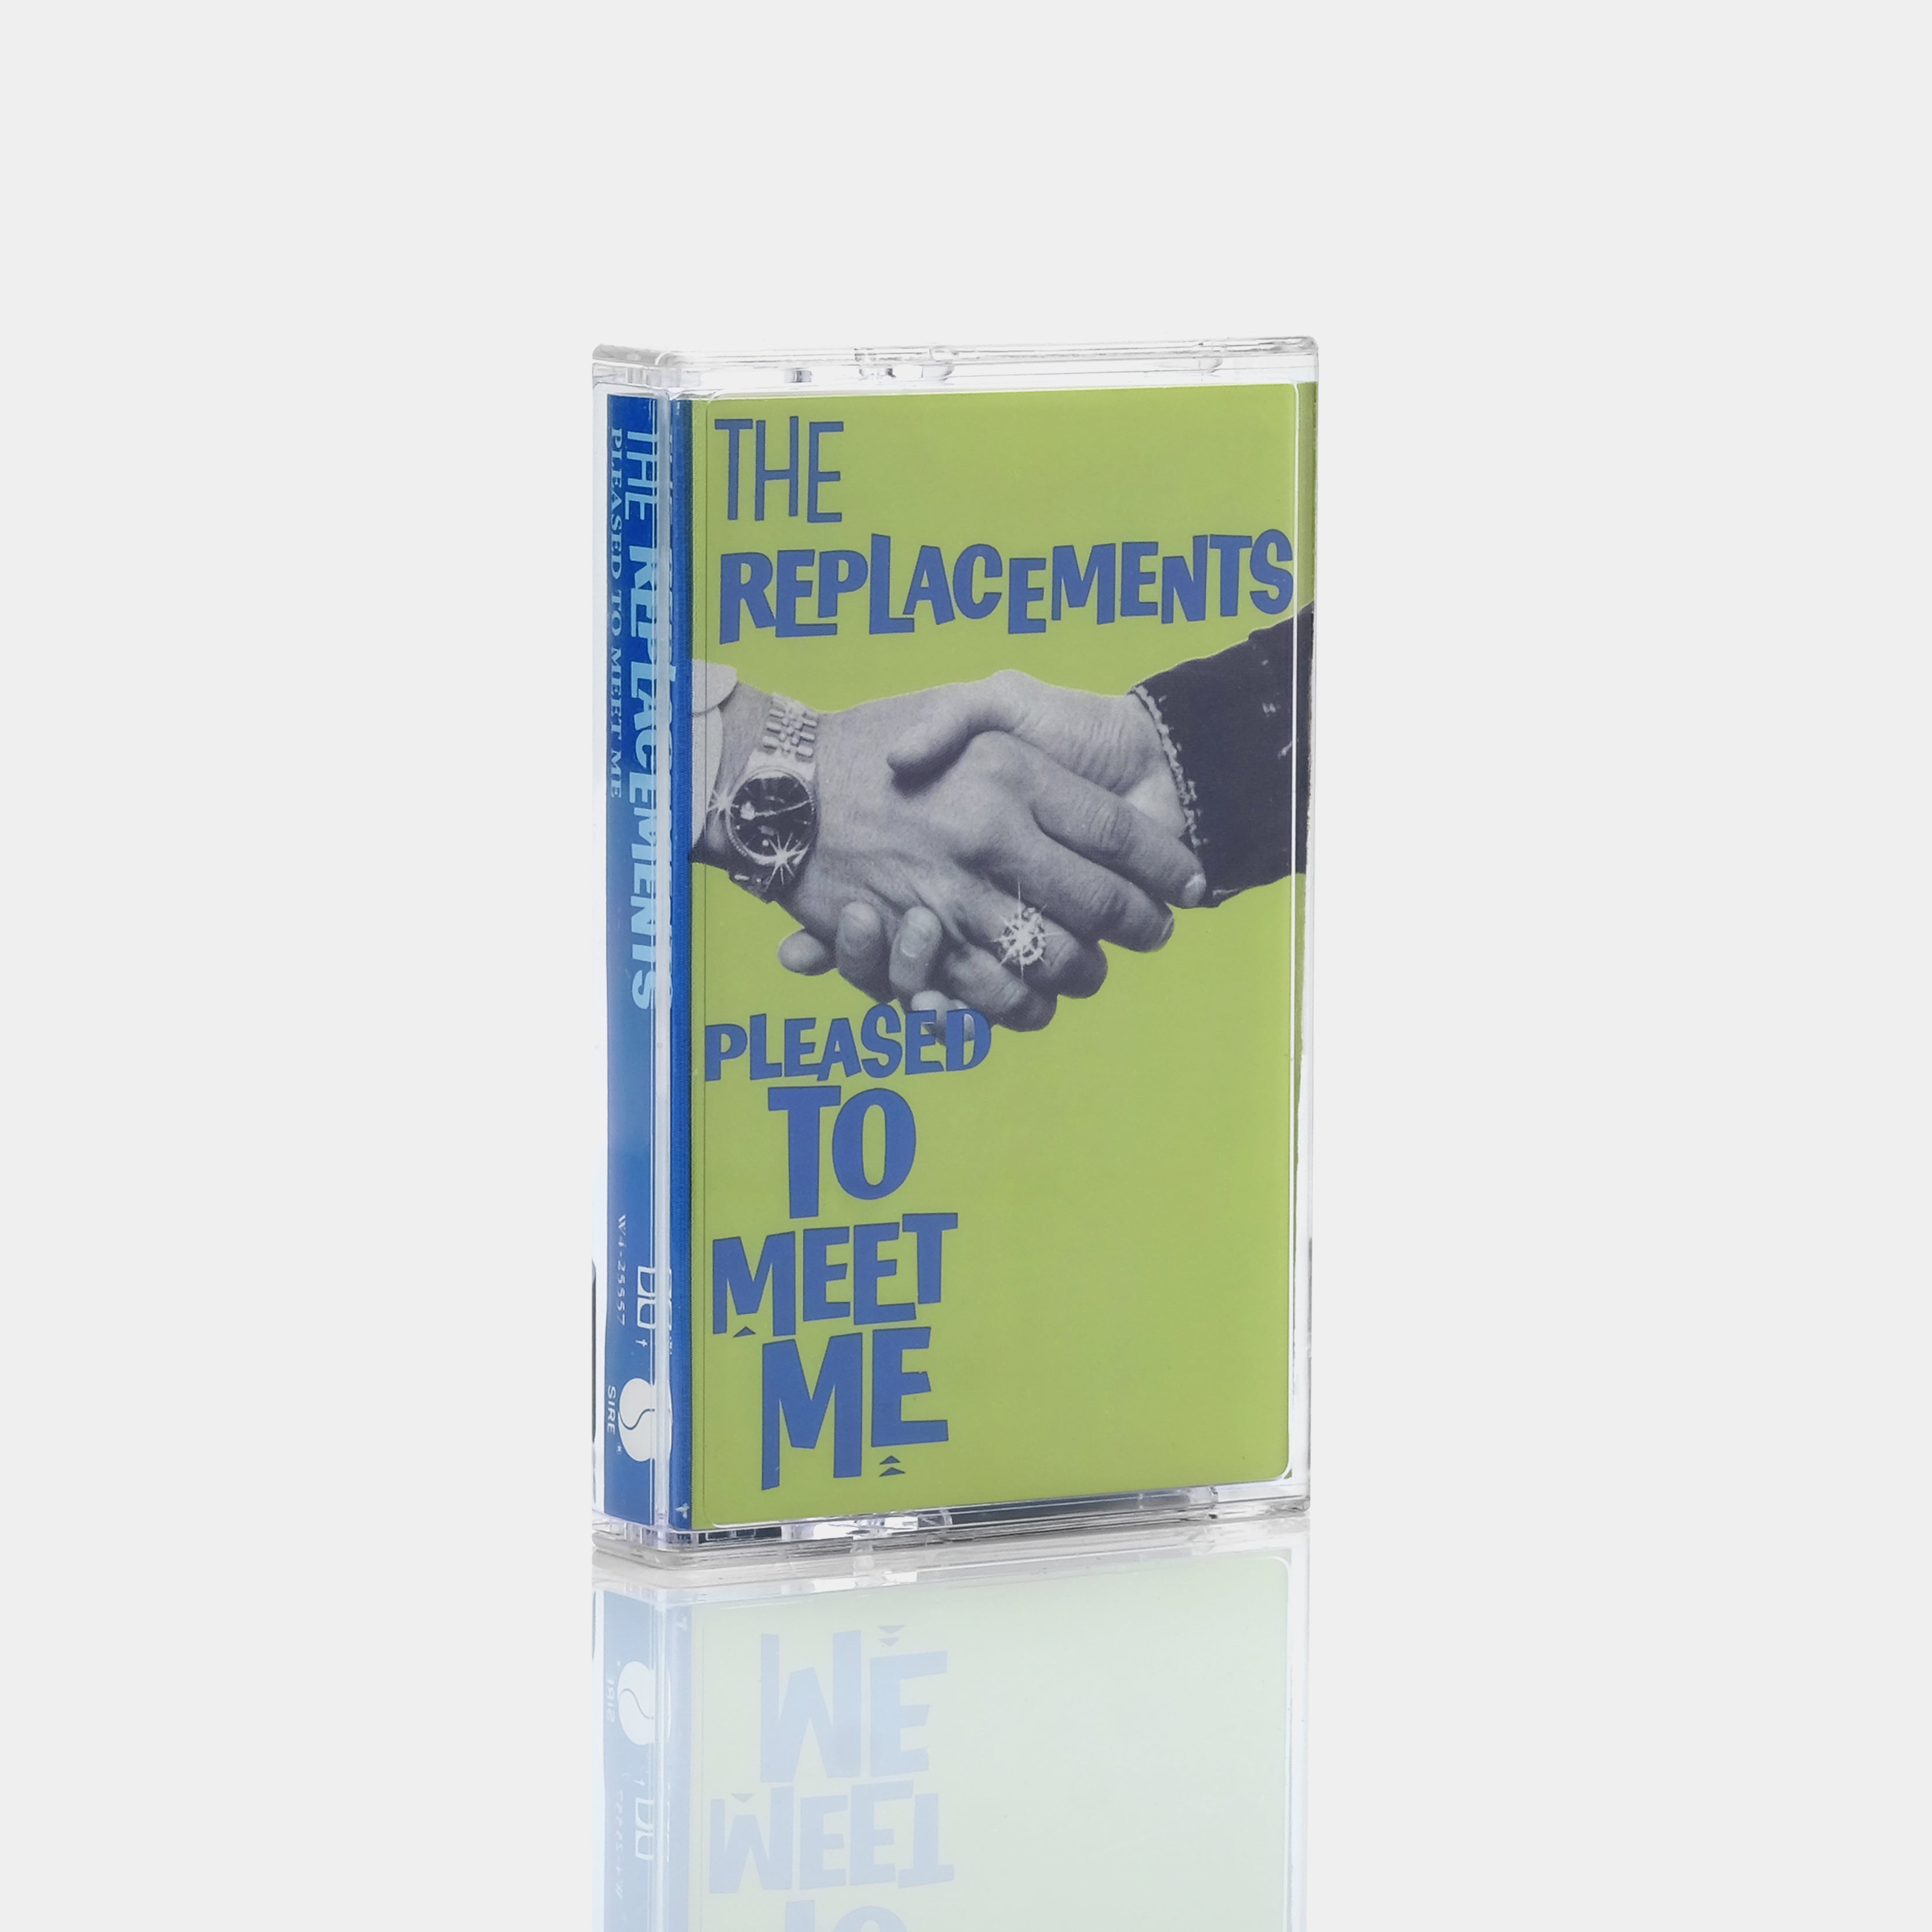 The Replacements - Pleased To Meet Me Cassette Tape